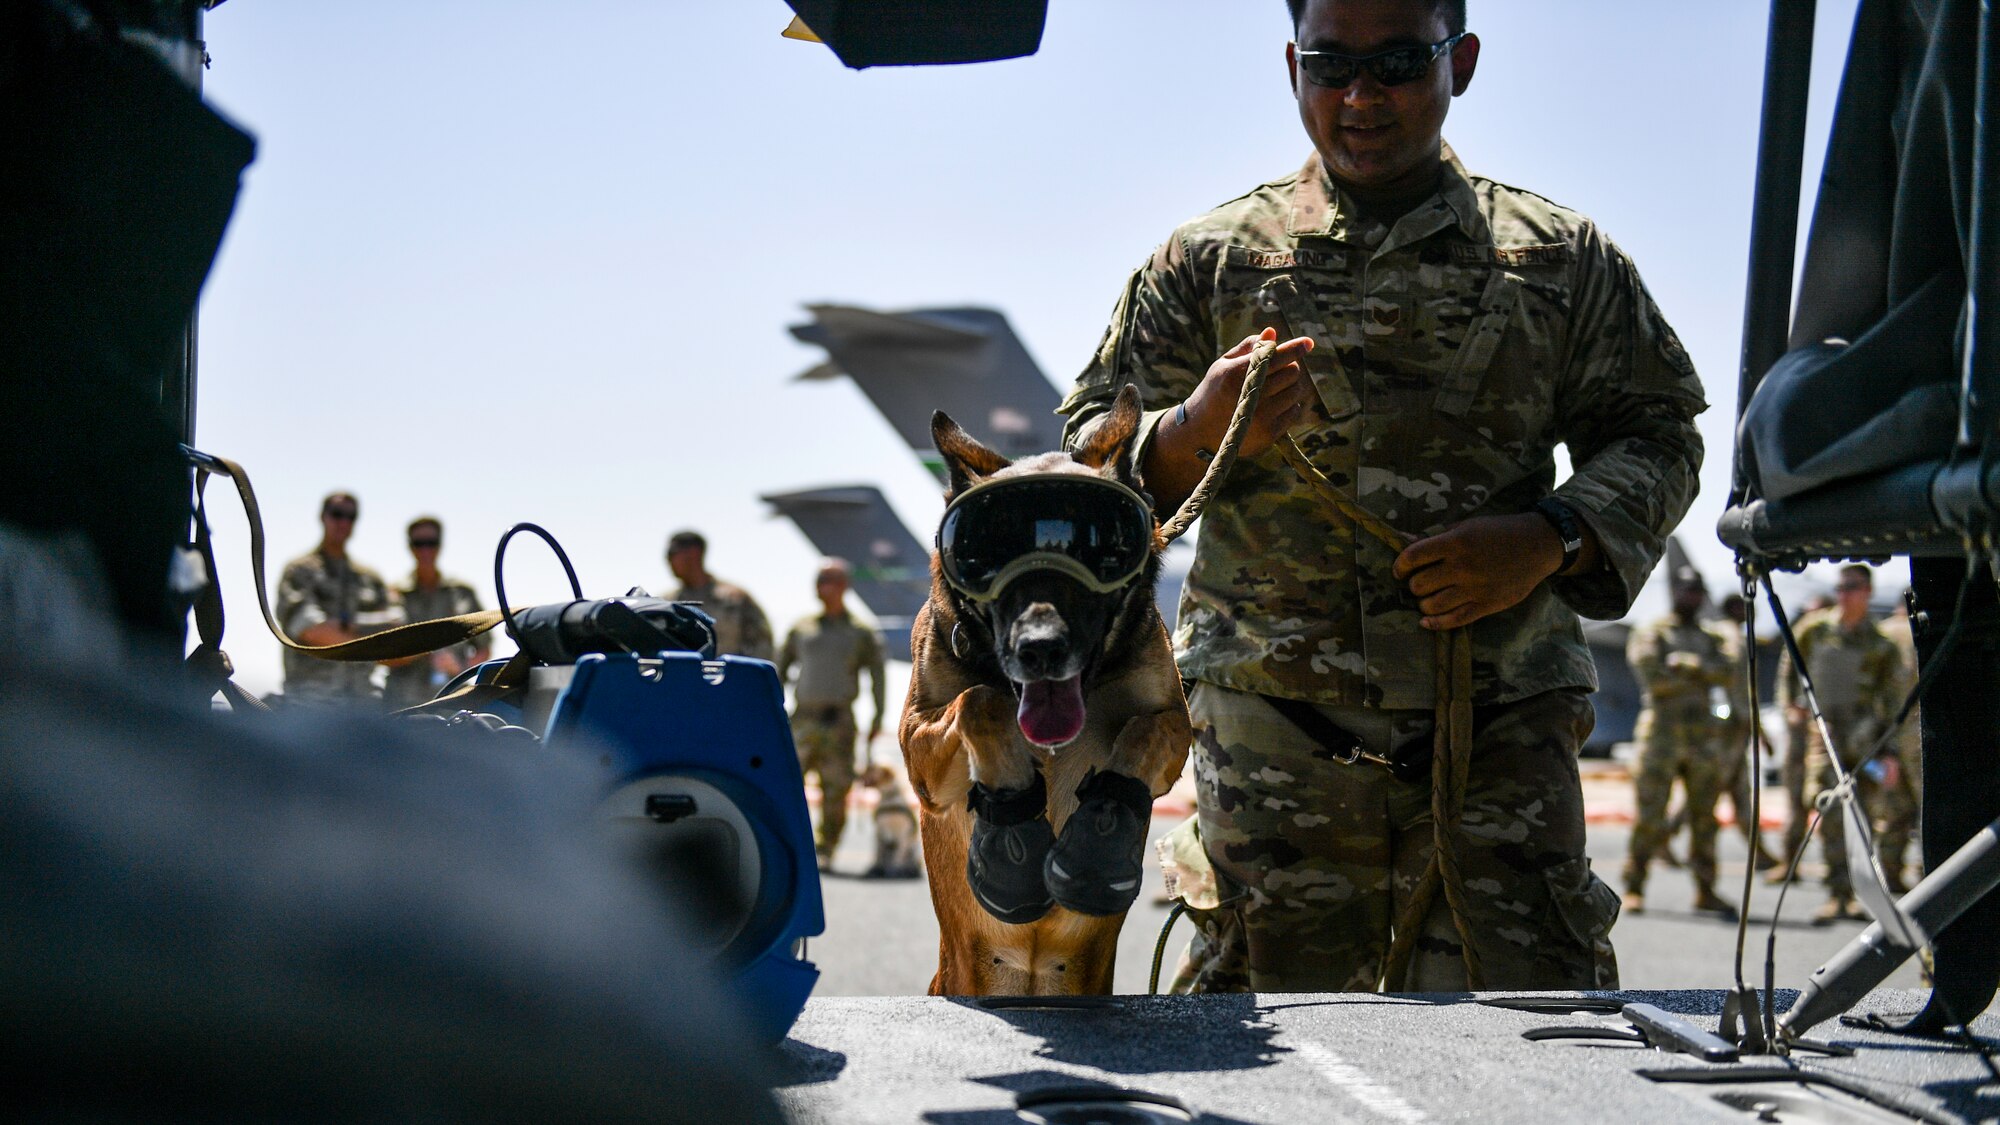 U.S. Air Force Staff Sgt. Adrian Magaling, 386th Expeditionary Security Forces Squadron military working dog handler, and MWD Lizzy, board a UH-60 Black Hawk helicopter as part of medical evacuation training at Ali Al Salem Air Base, Kuwait, Sept. 13, 2019. The walkthrough was phase one of the exercise where teams conducted a cold load by boarding the aircraft with the engines off for their dogs to acclimate to the new environment. (U.S. Air Force photo by Staff Sgt. Mozer O. Da Cunha)